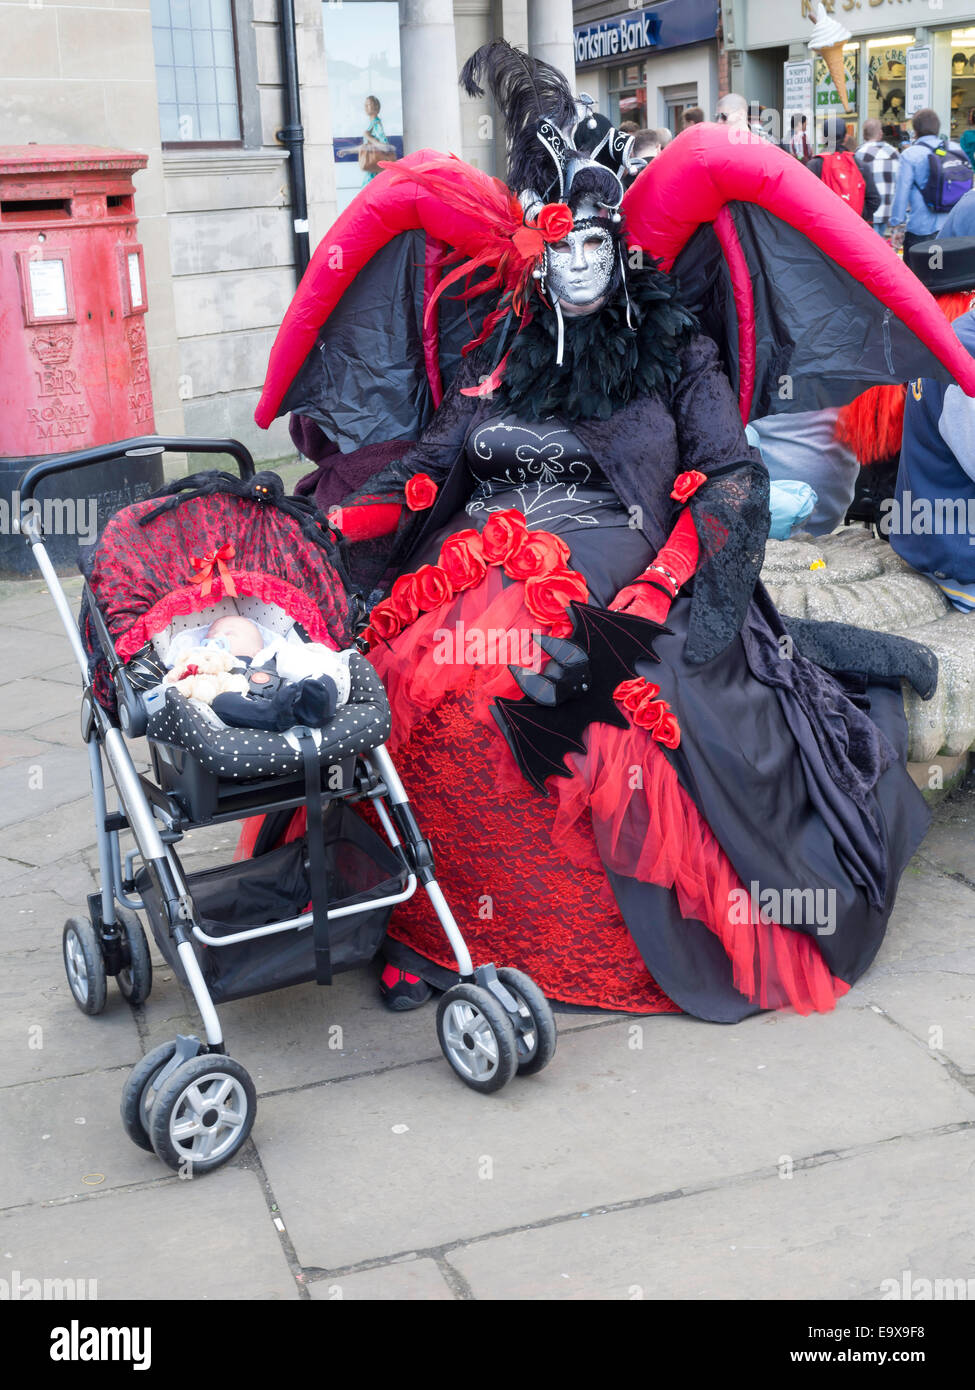 A woman in an inflatable bat costume seated with a baby doll dressed as Goths at the Whitby Goth Week End Autumn 2014 Stock Photo